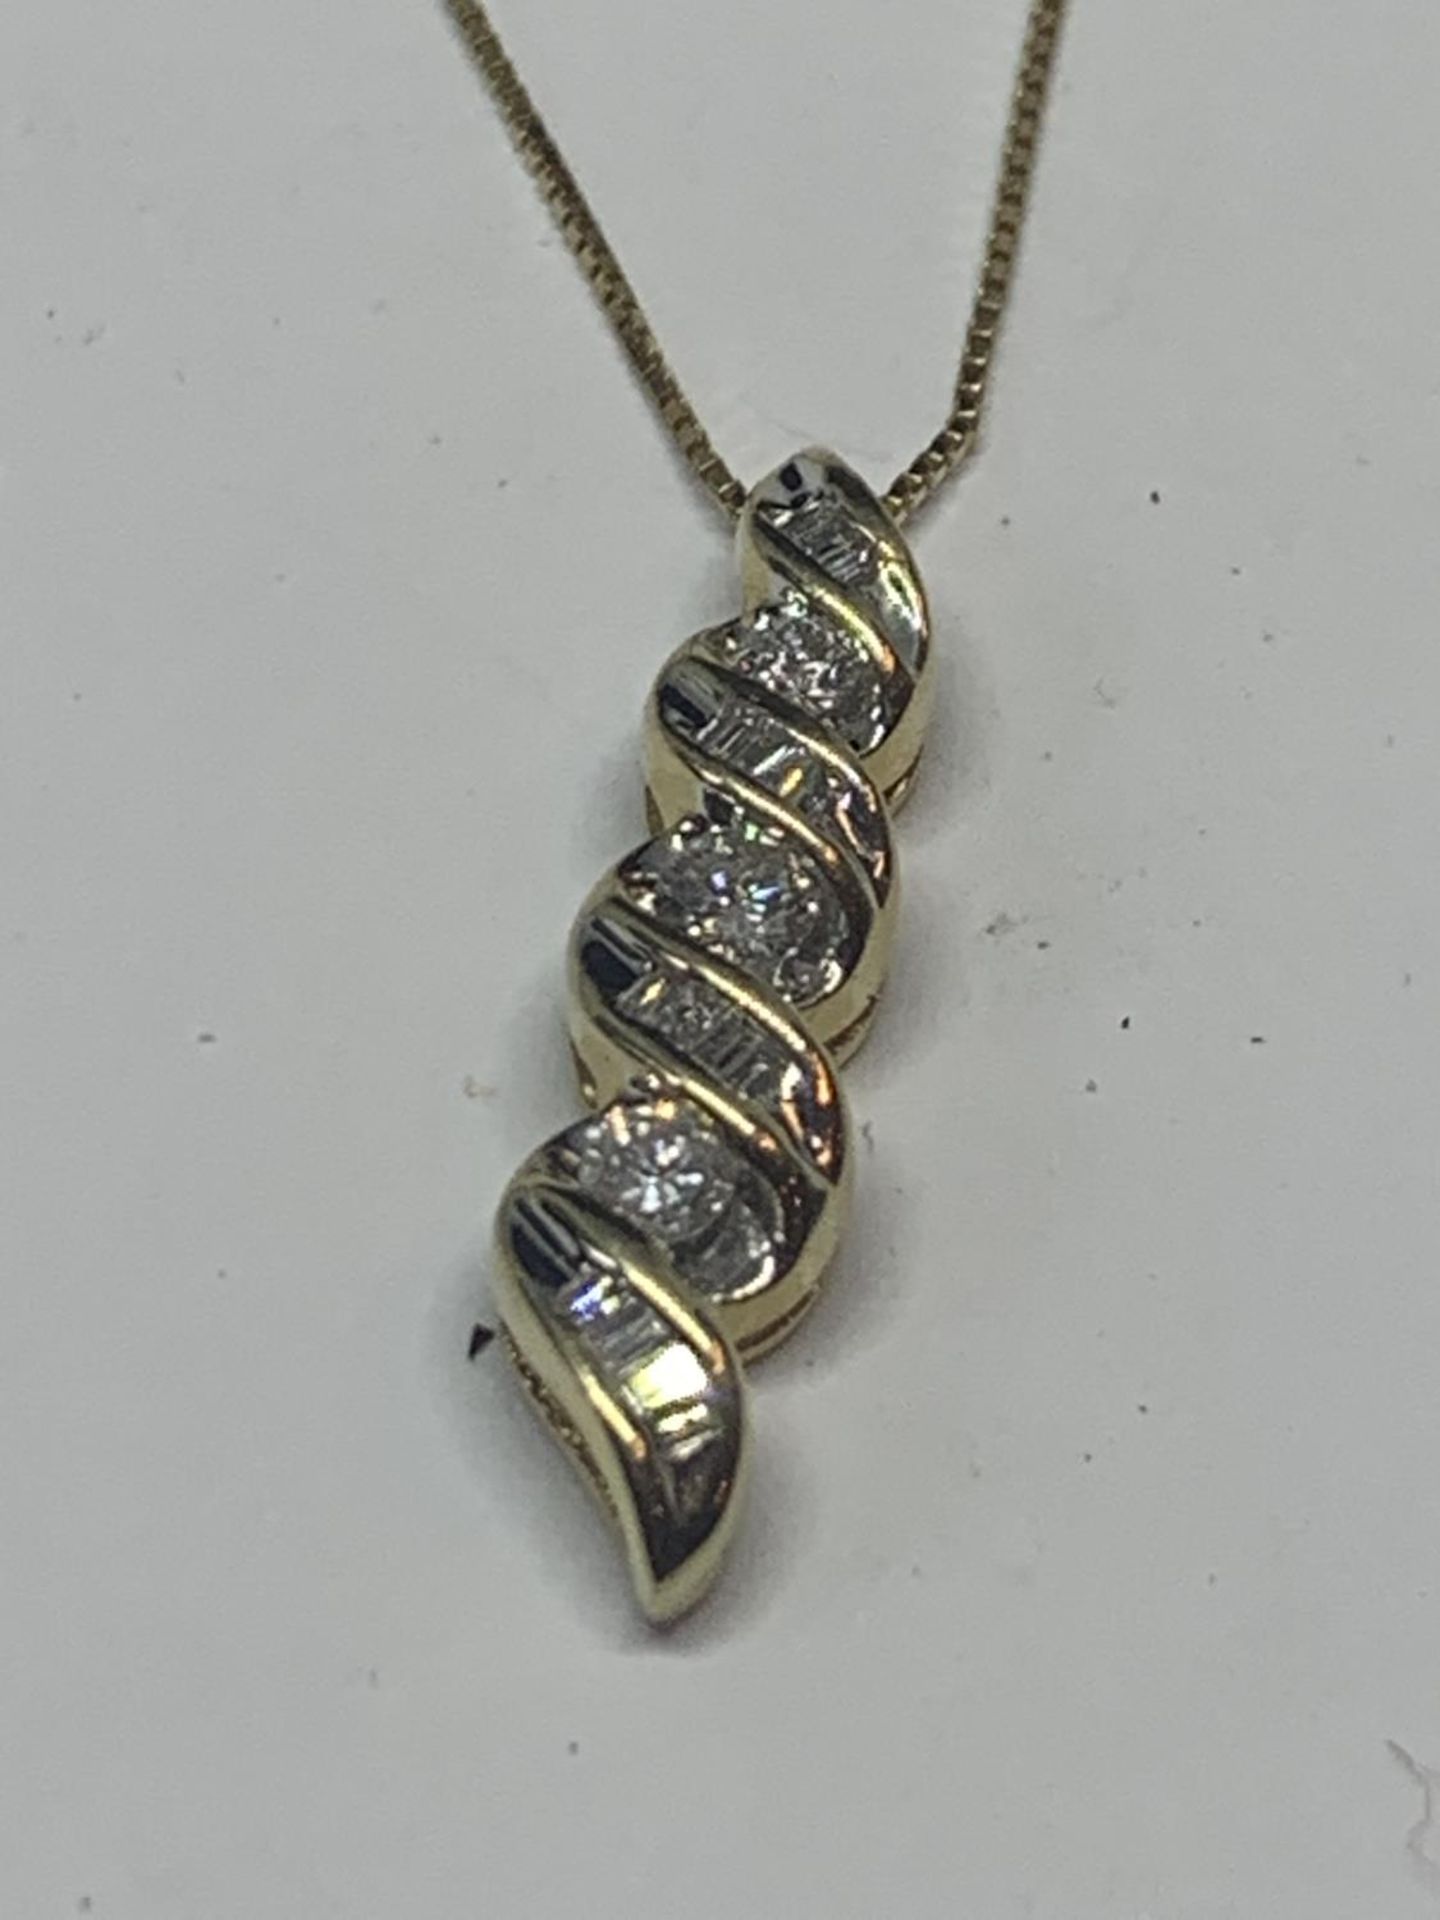 A 14 CARAT GOLD DROP PENDANT WITH APPROXIMATELY 1 CARAT OF DIAMONDS CHAIN LENGTH 45CM - Image 2 of 6